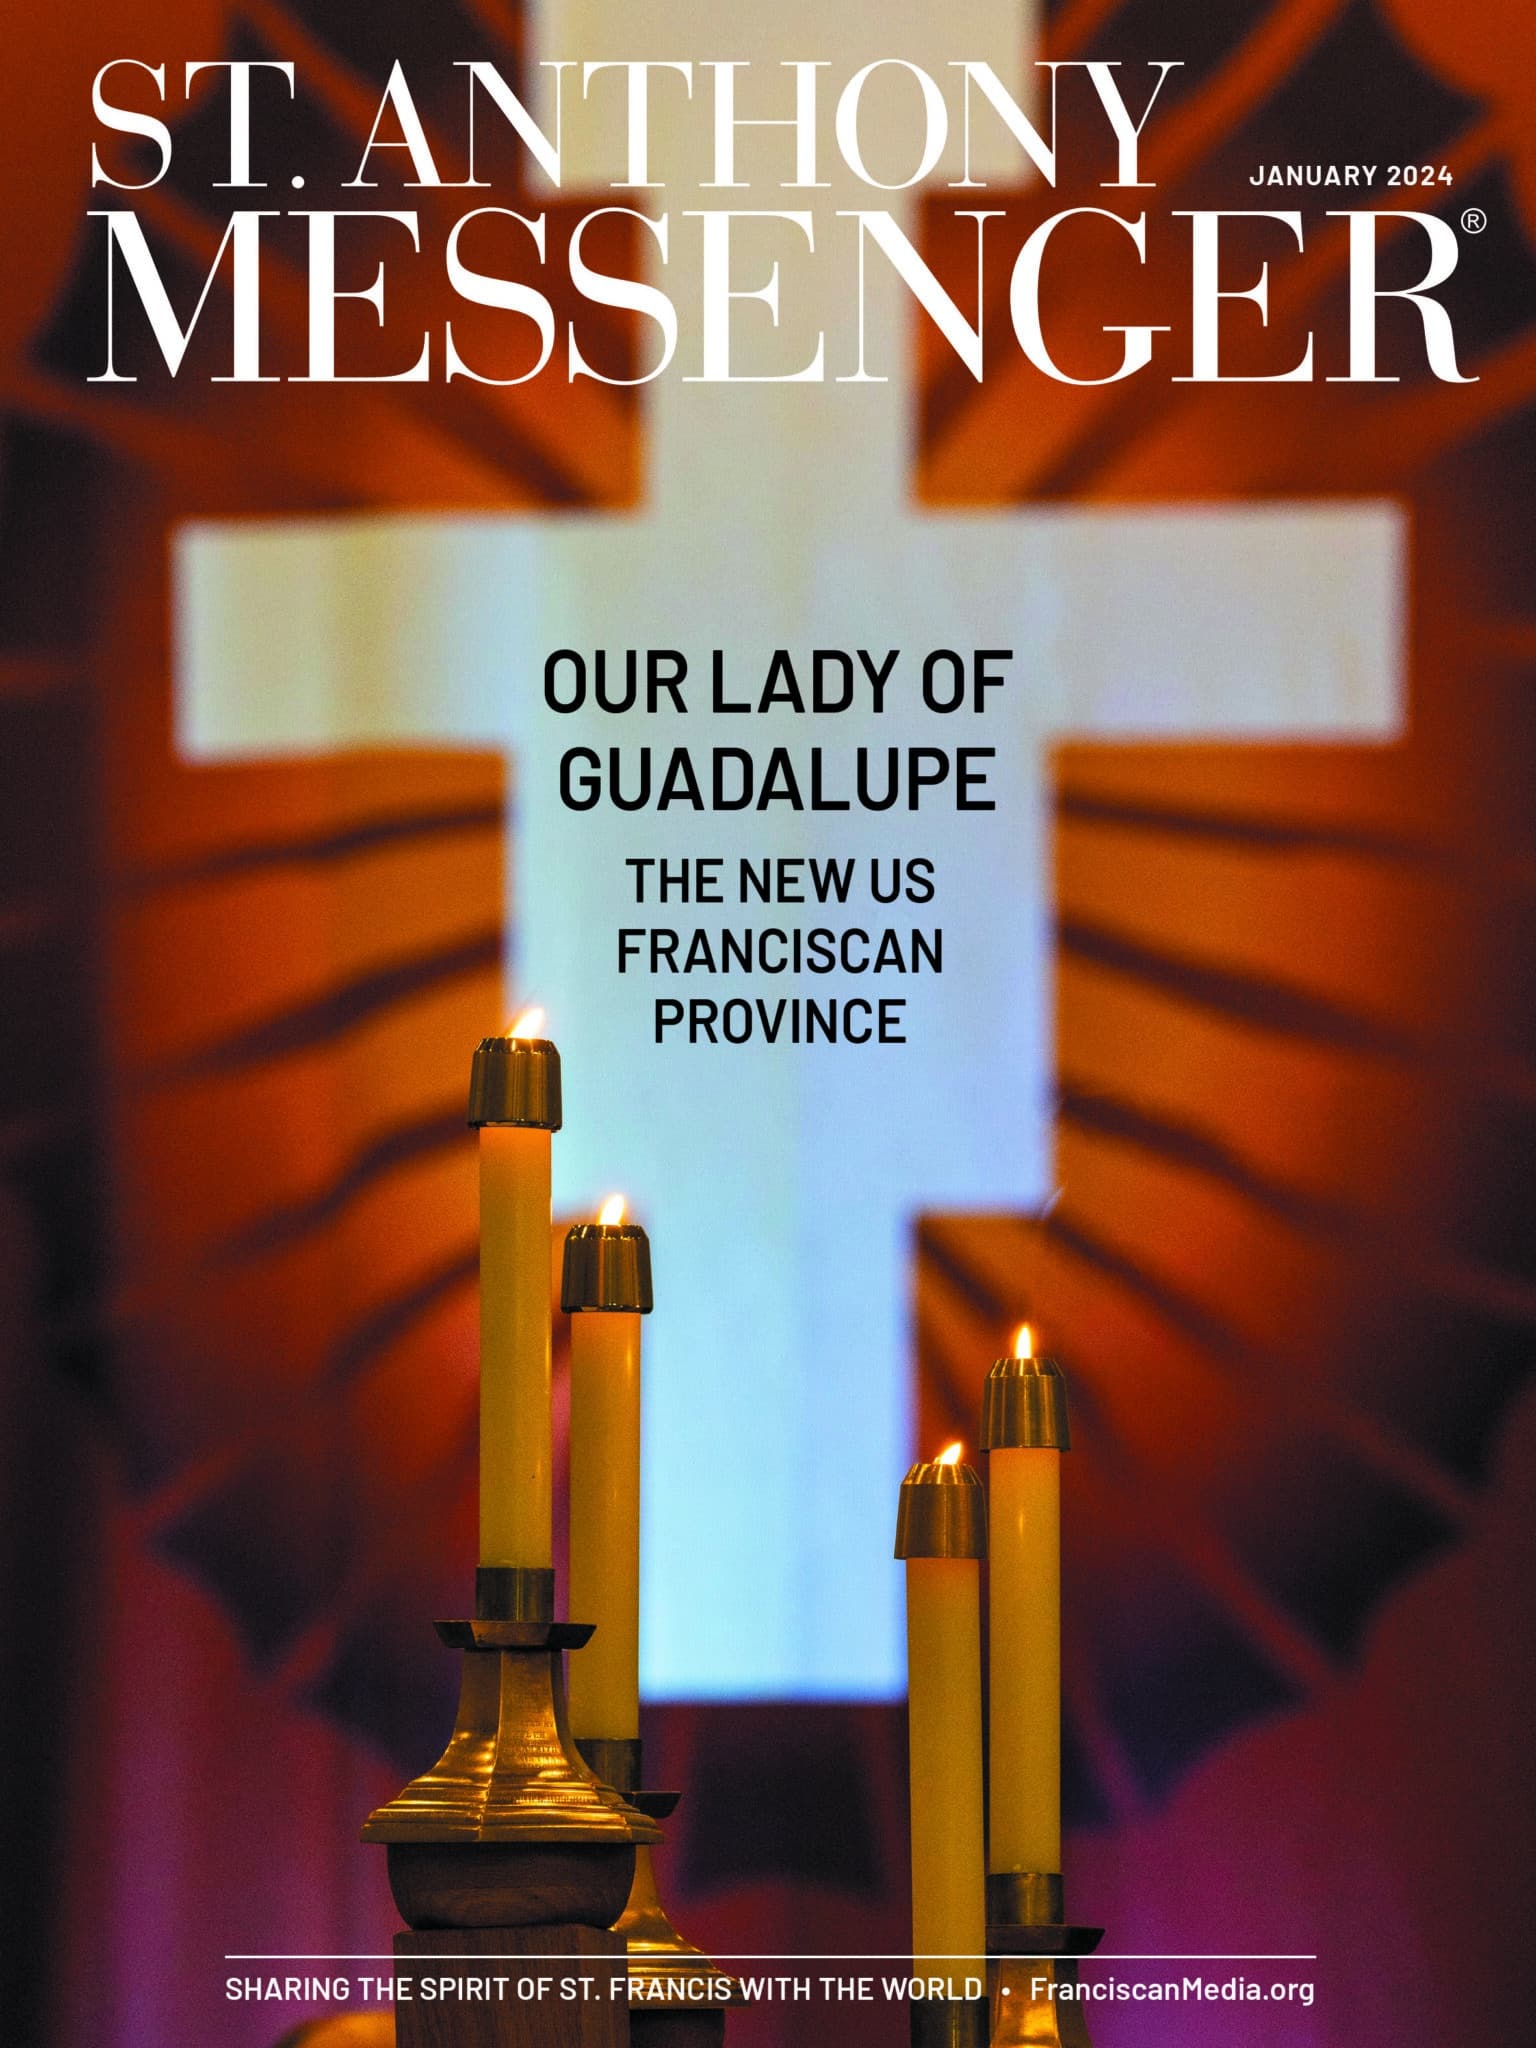 Our Lady of Guadalupe Province is the cover story in this month's St. Anthony Messenger magazine.